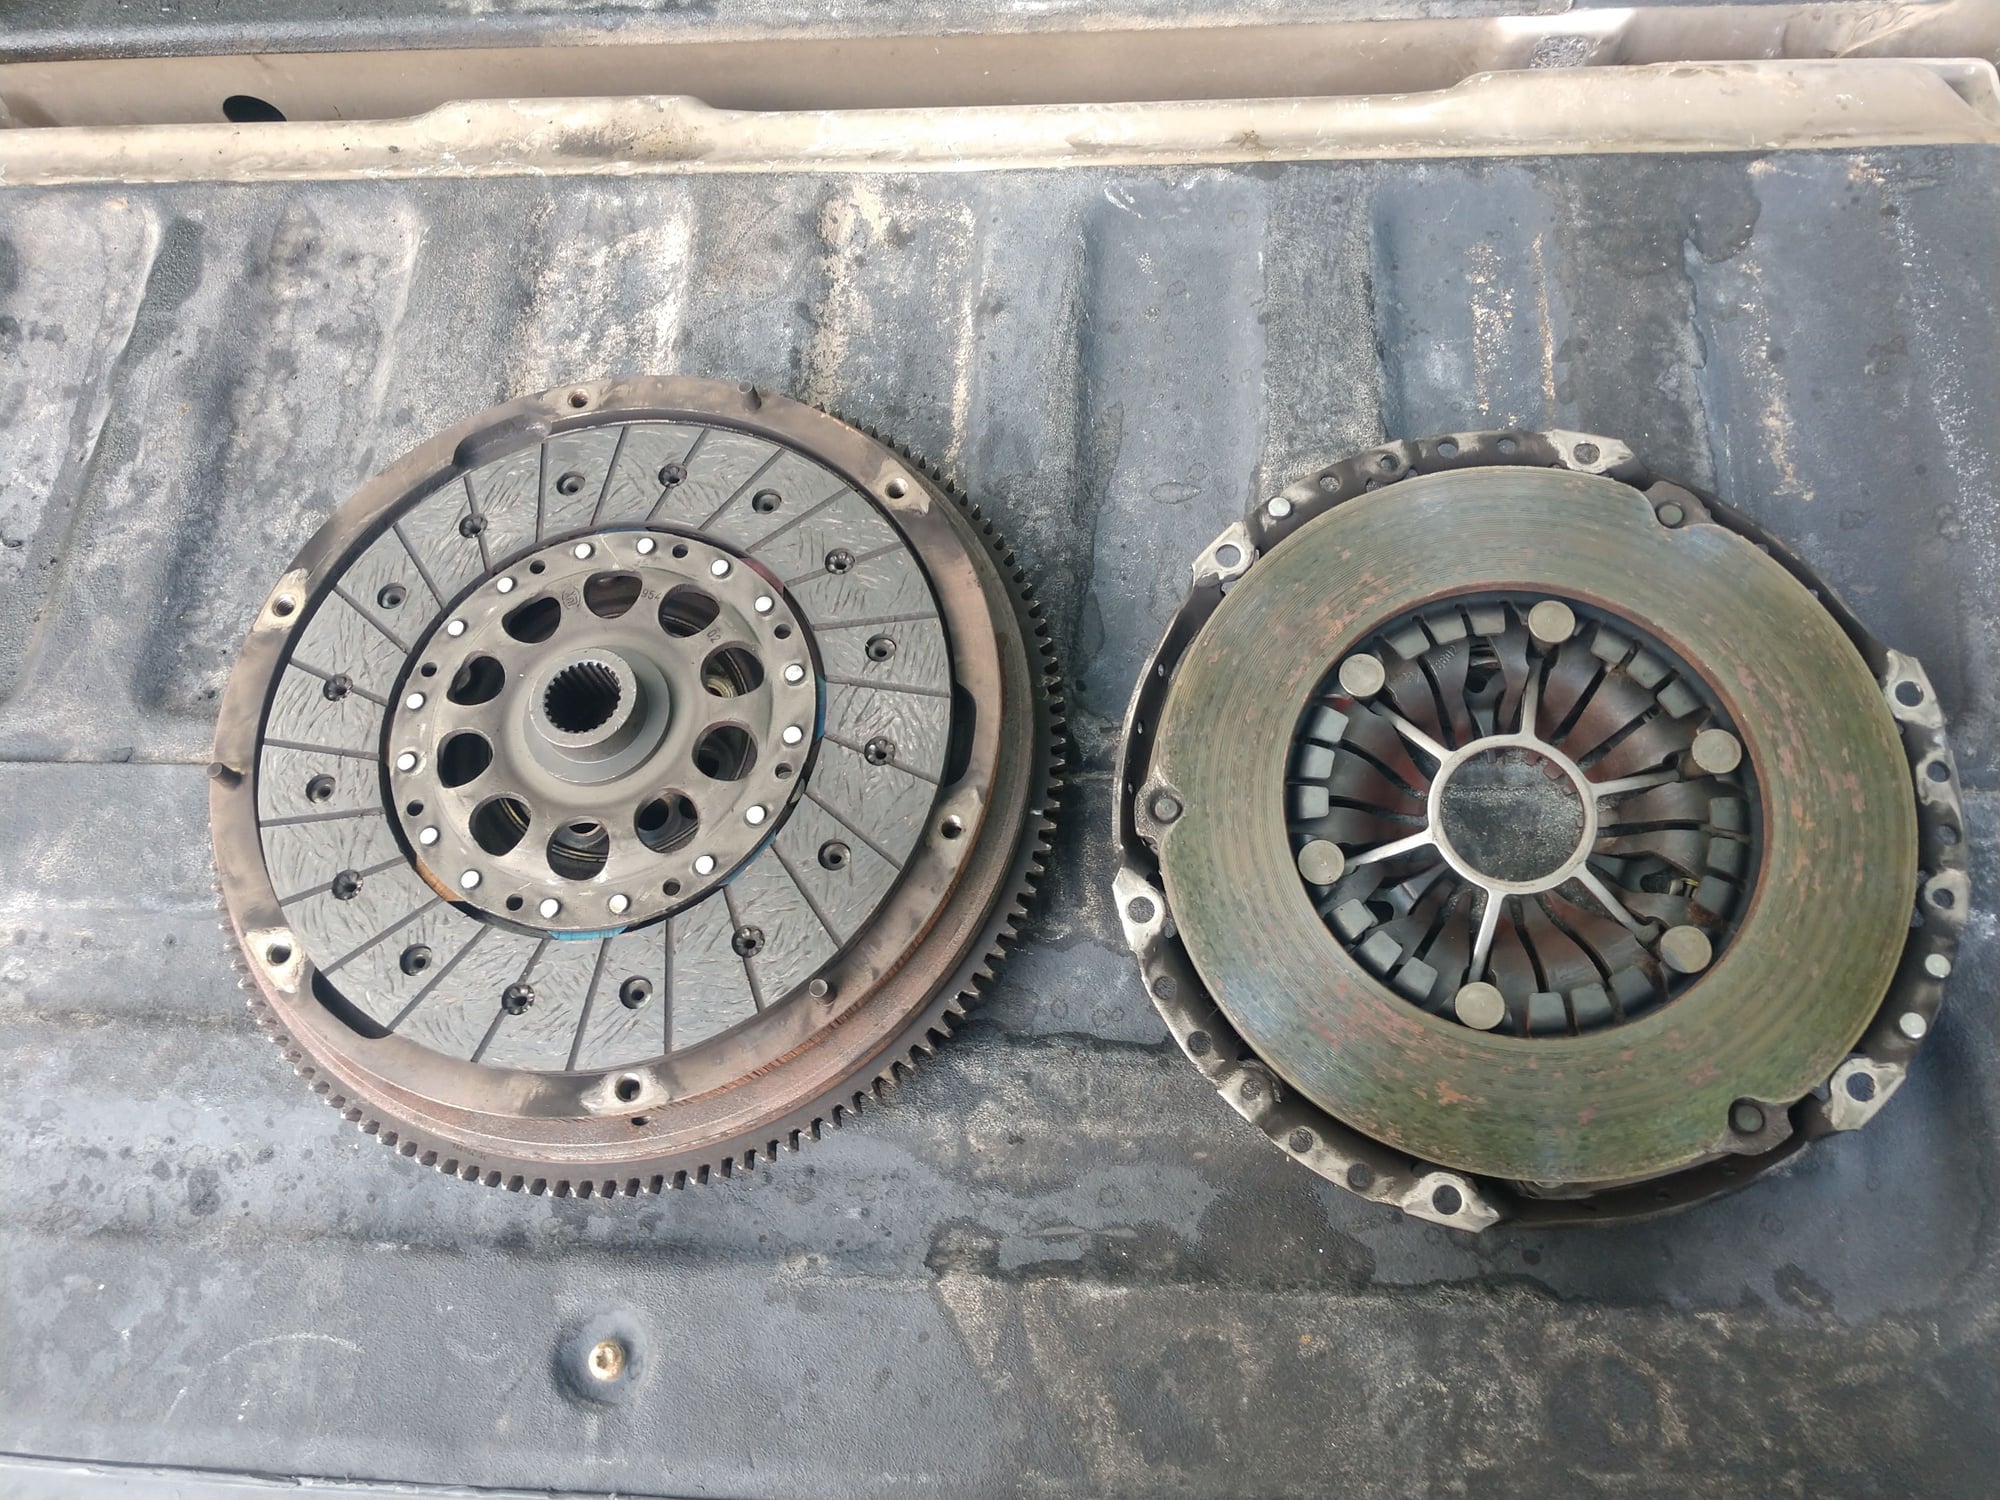 Drivetrain - SOLD: luk clutch, pressure plate, and flywheel - Used - 2004 to 2006 Acura TL - Brownsville, TX 78520, United States